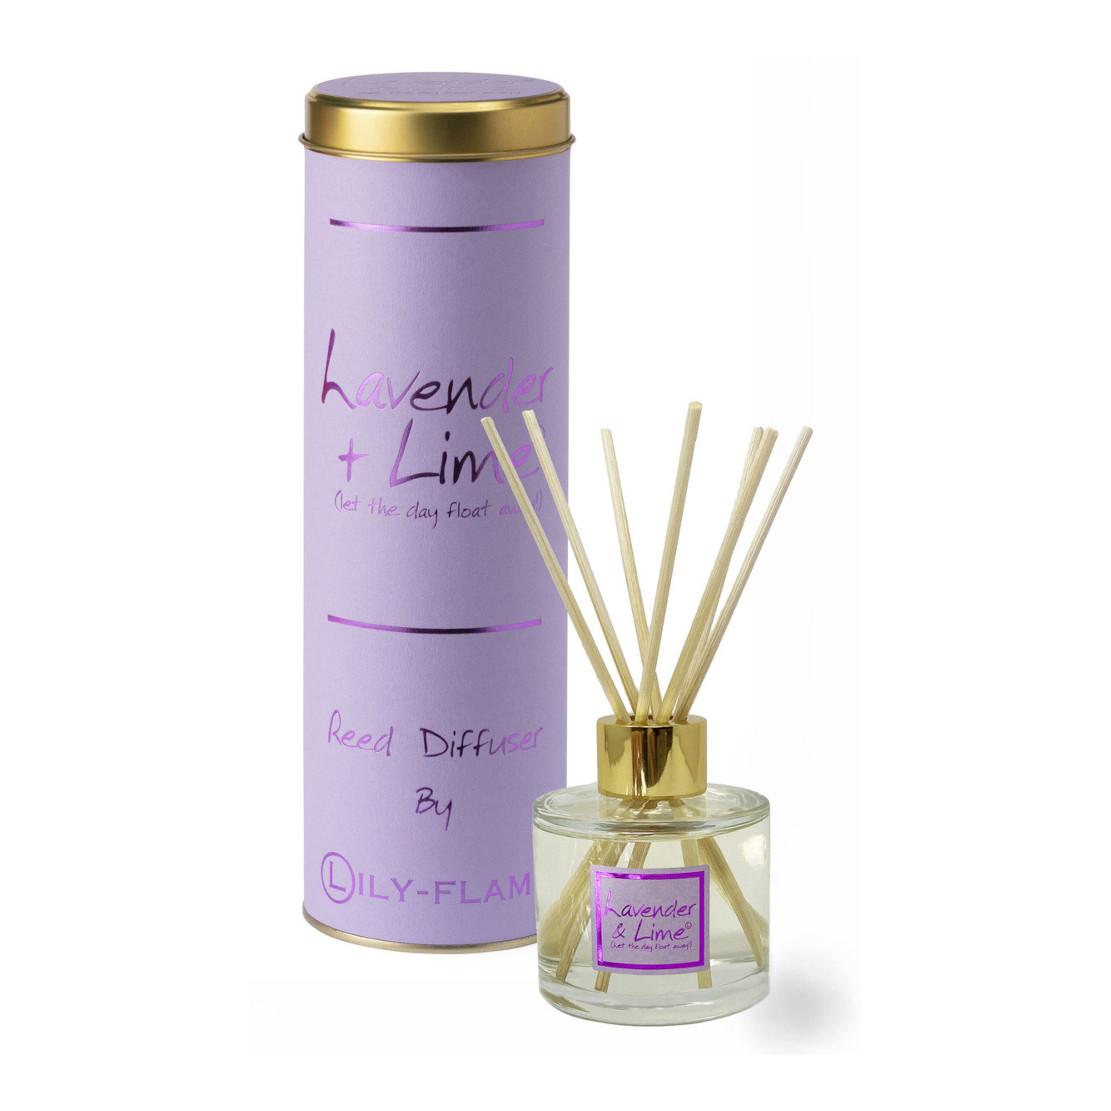 Lily Flame Lavender & Lime Reed Diffuser